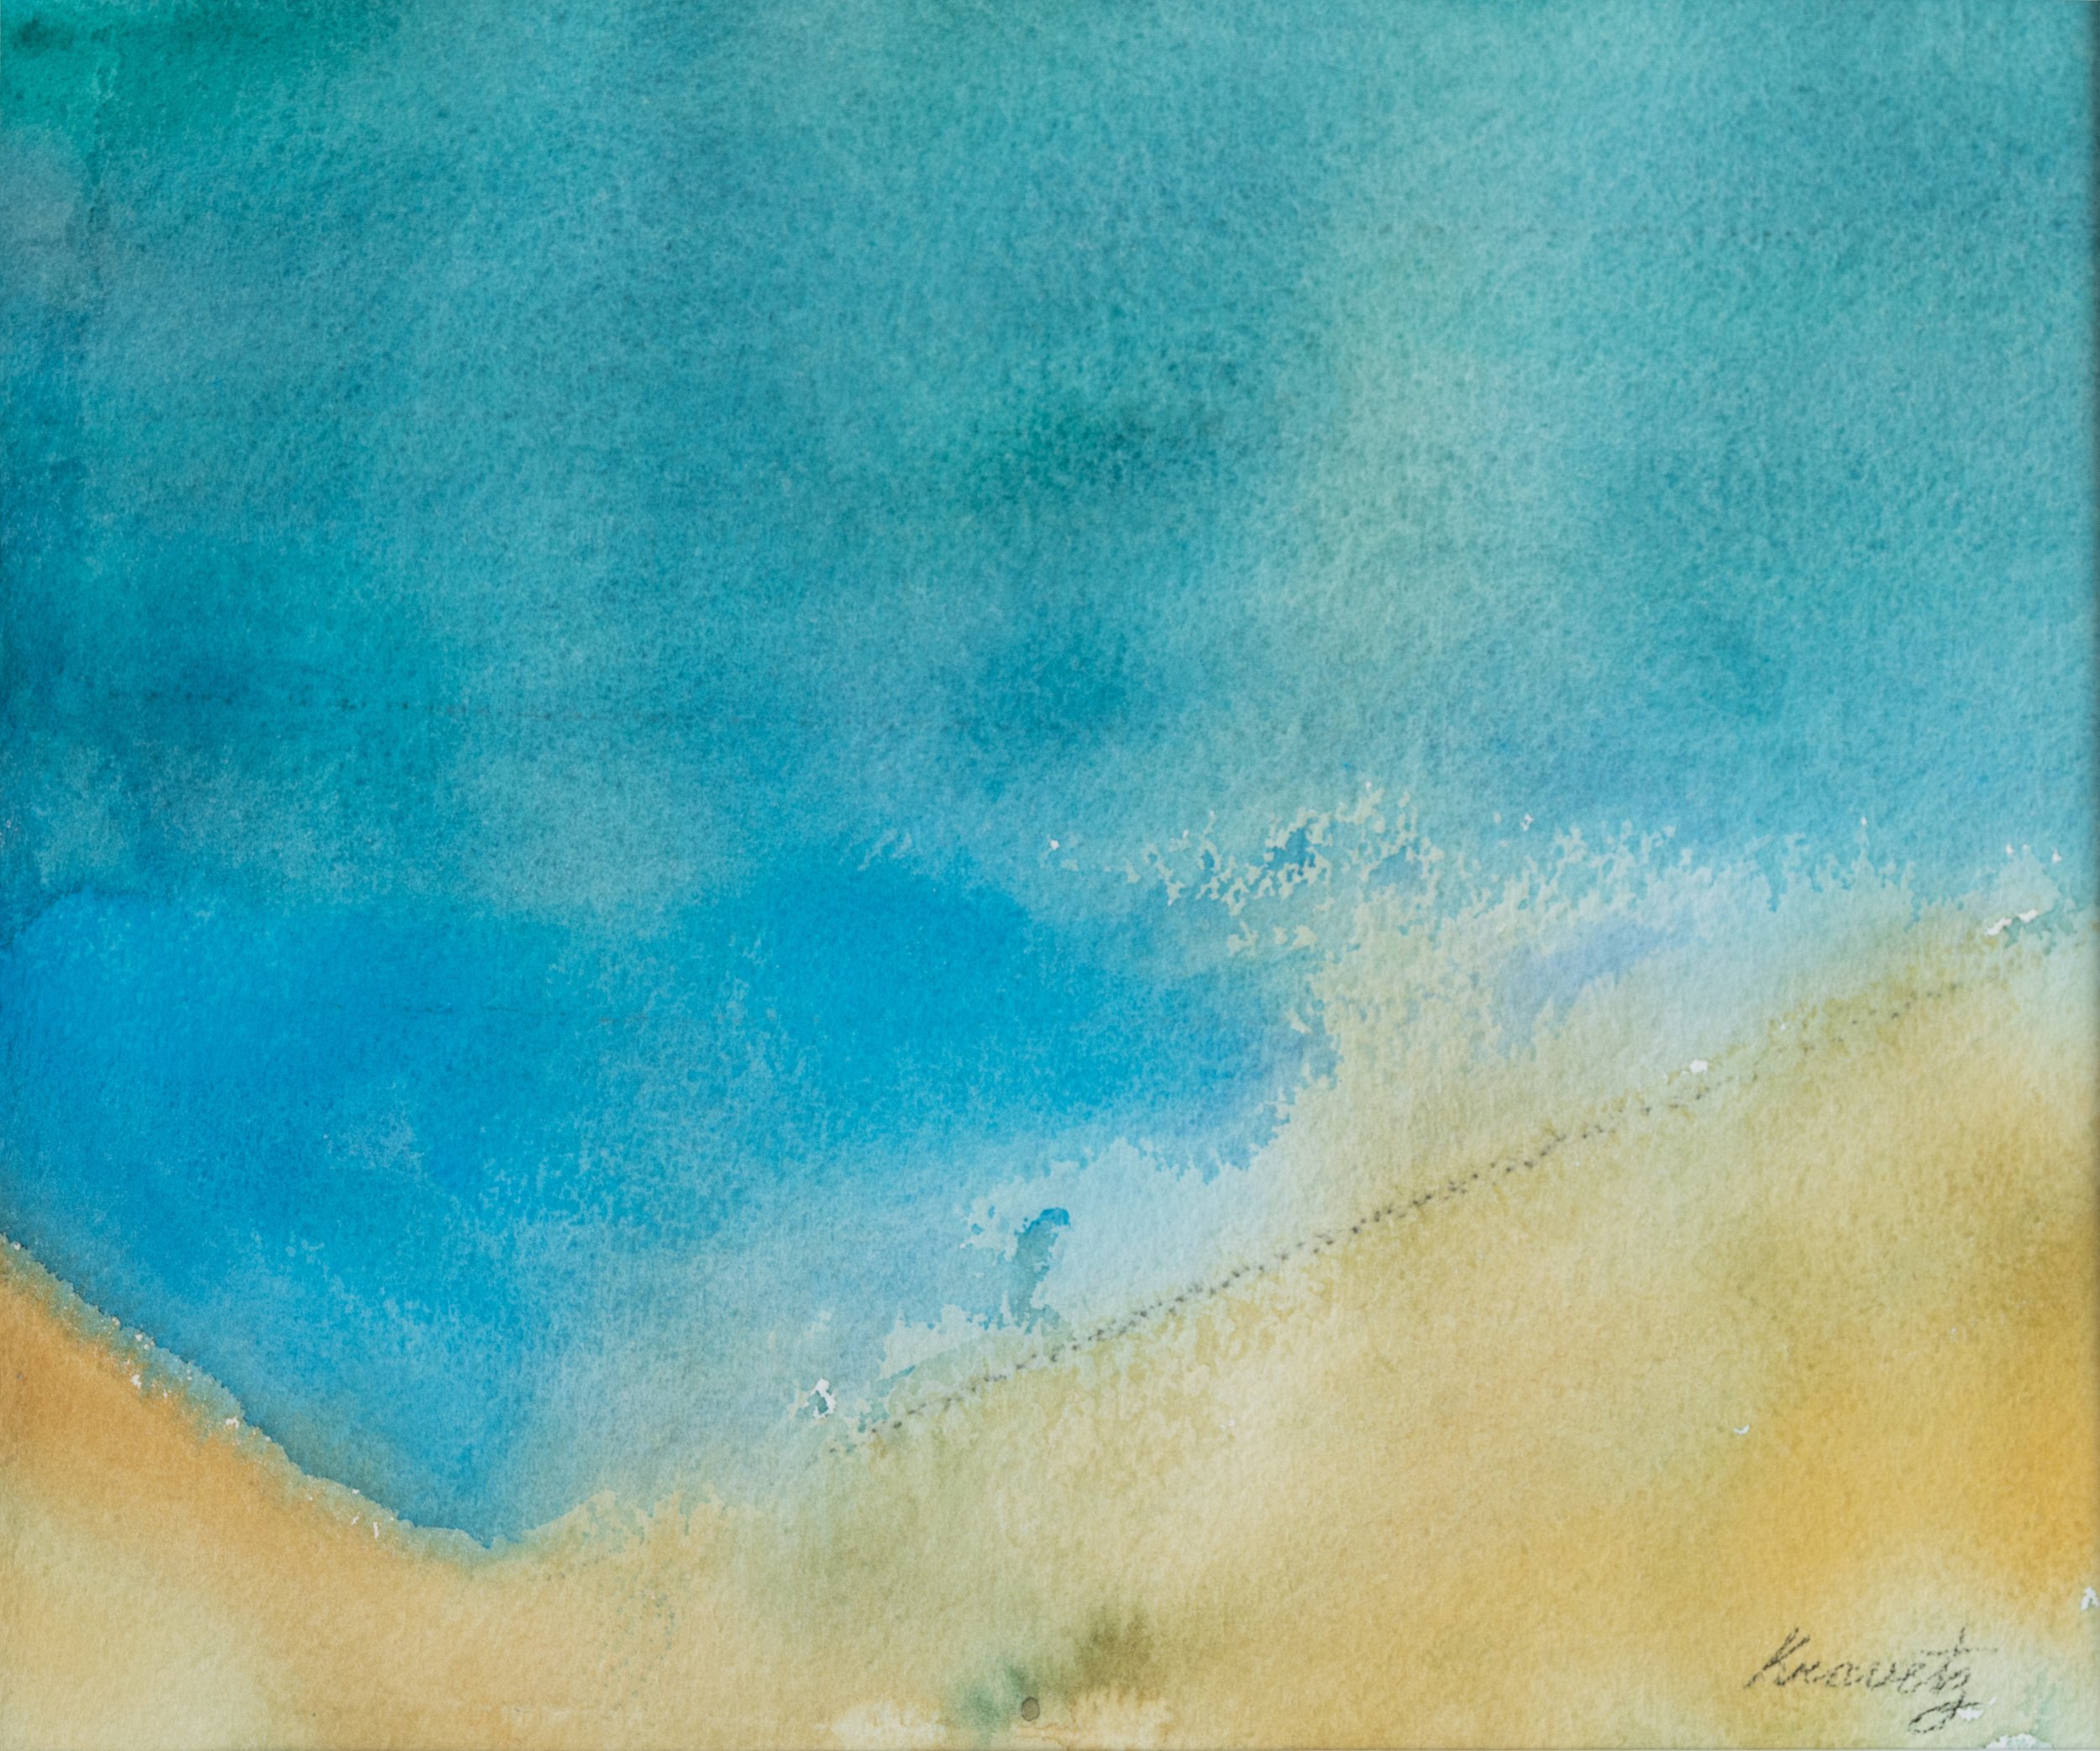 Recollections: J.M.W. Turner Tribute, 1989, watercolor, 16x20 inches with mat